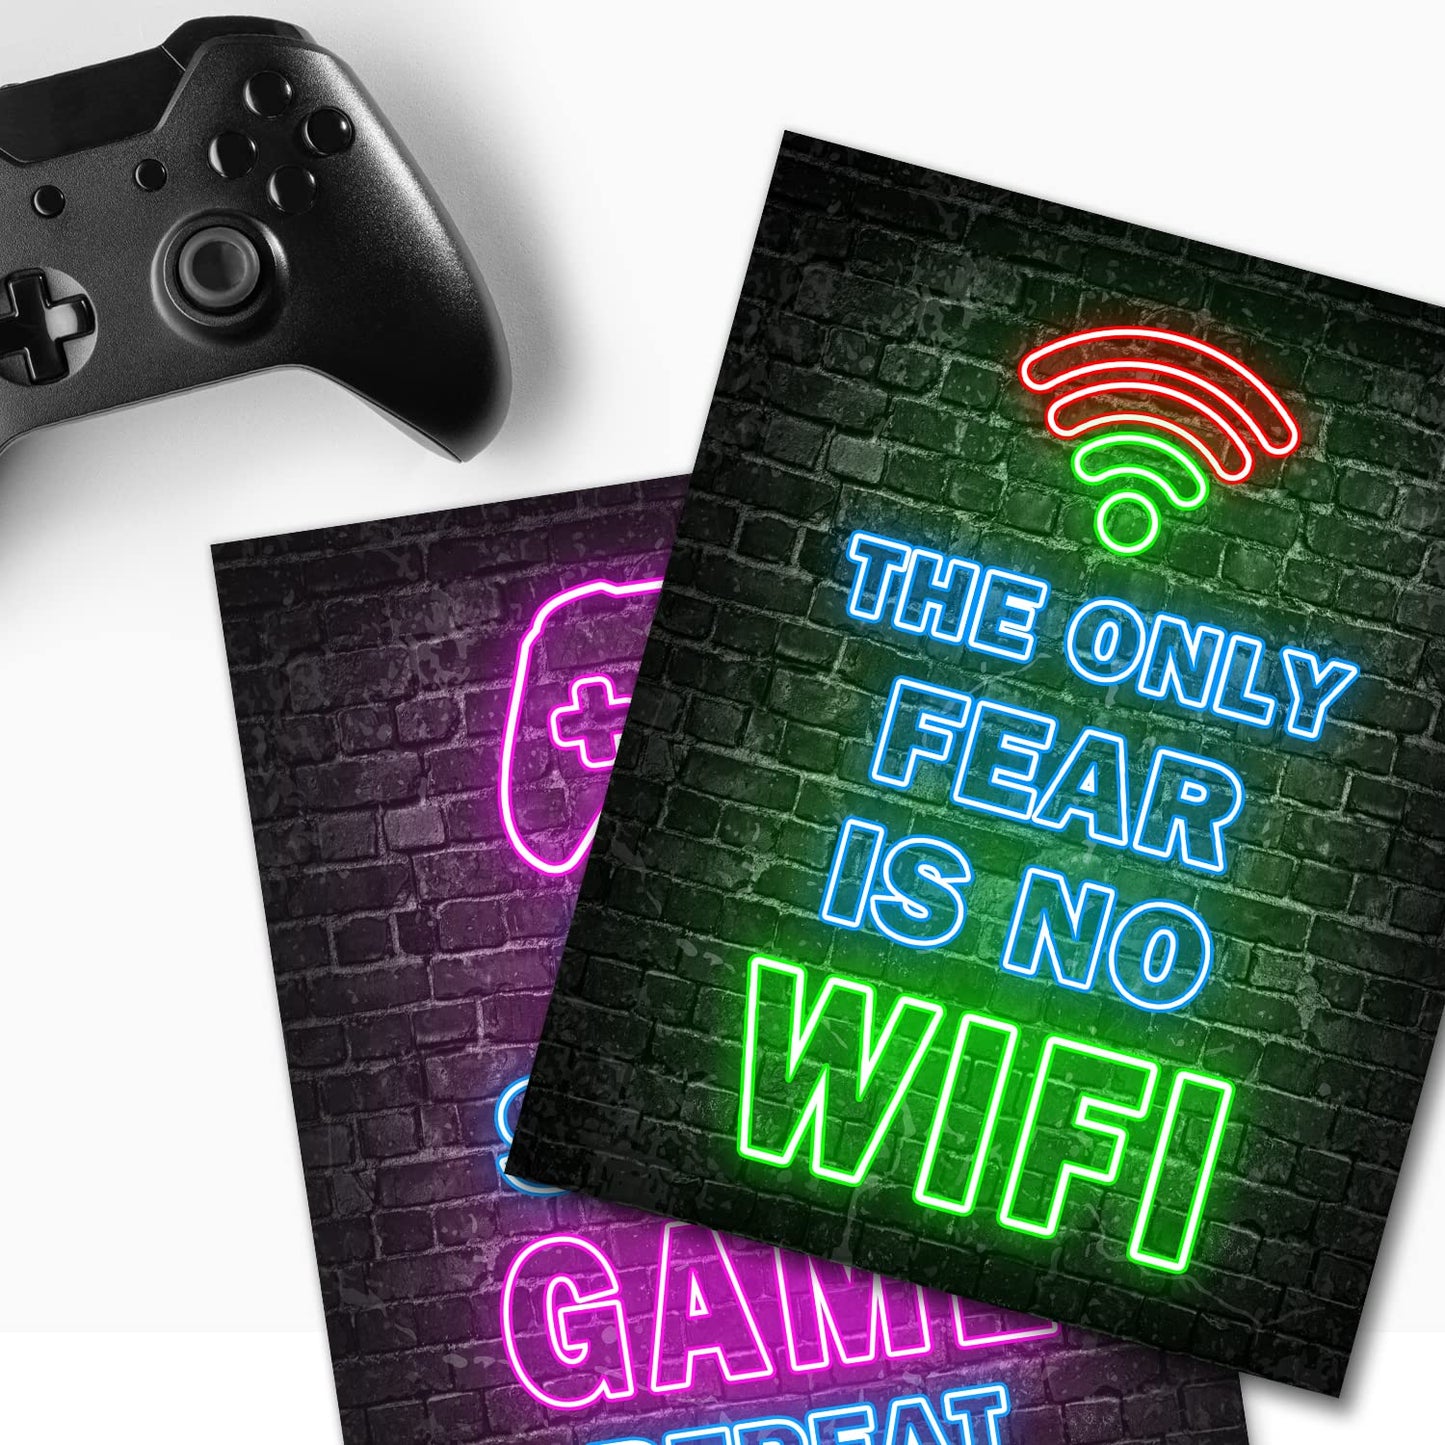 Printed Neon Gaming Posters Set of 4 (8”X 10”), Boys Room Decorations for Bedroom,Video Game Wall Art,Gamer, Teen boy bedroom, game room, No Frames - amzGamess